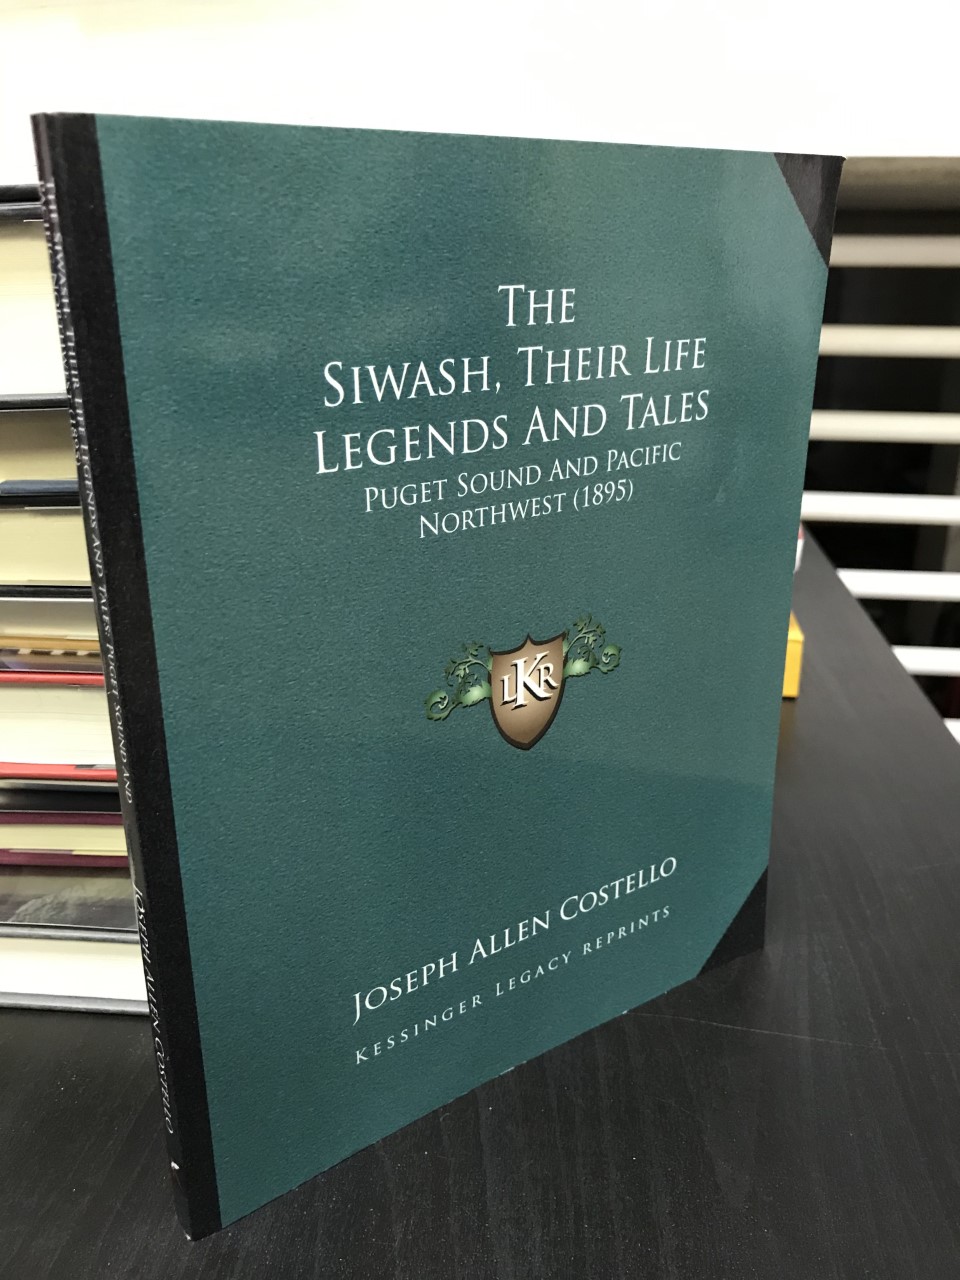 The Siwash: Their Life Legends and Tales - Puget Sound and Pacific Northwest - Costello, J. A. (Joseph Allen)